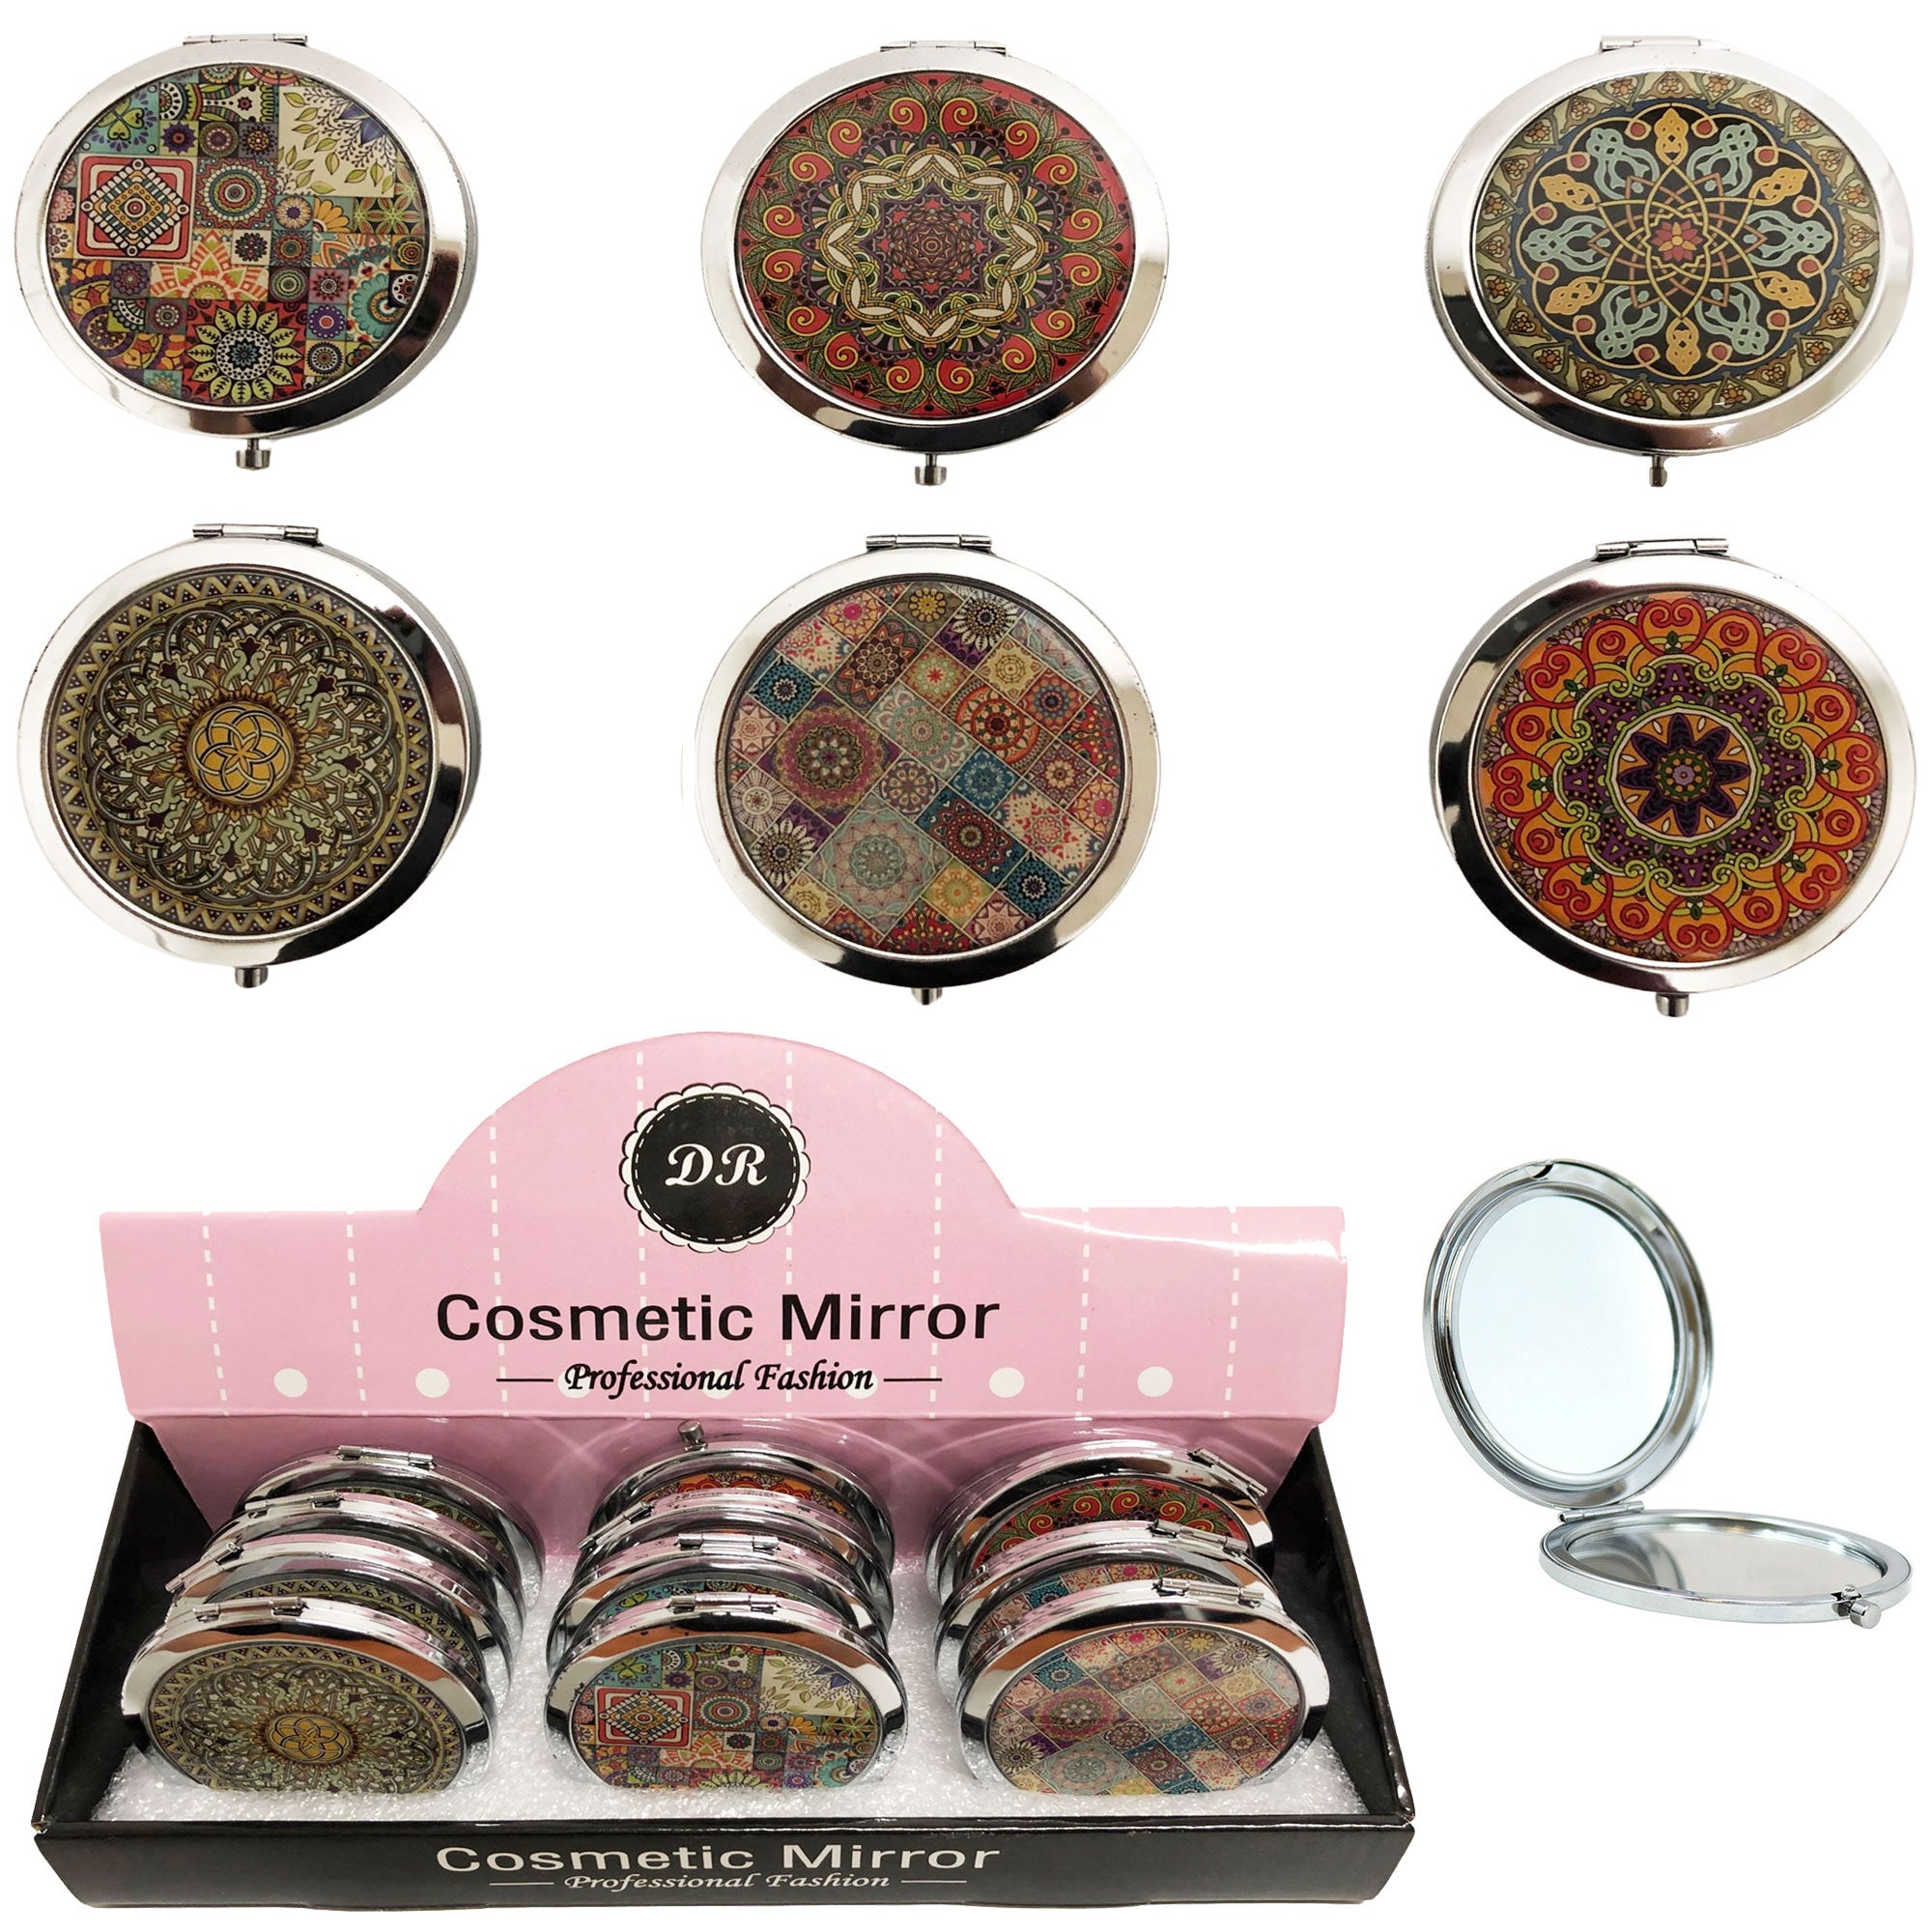 CLEARANCE COSMETIC MIRRORS GEOMETRIC PRINTS (CASE OF 60 - $1.00 / PIECE)  Wholesale Round Cosmetic Mirrors in Geometric Prints SKU: 801-DATURA-60